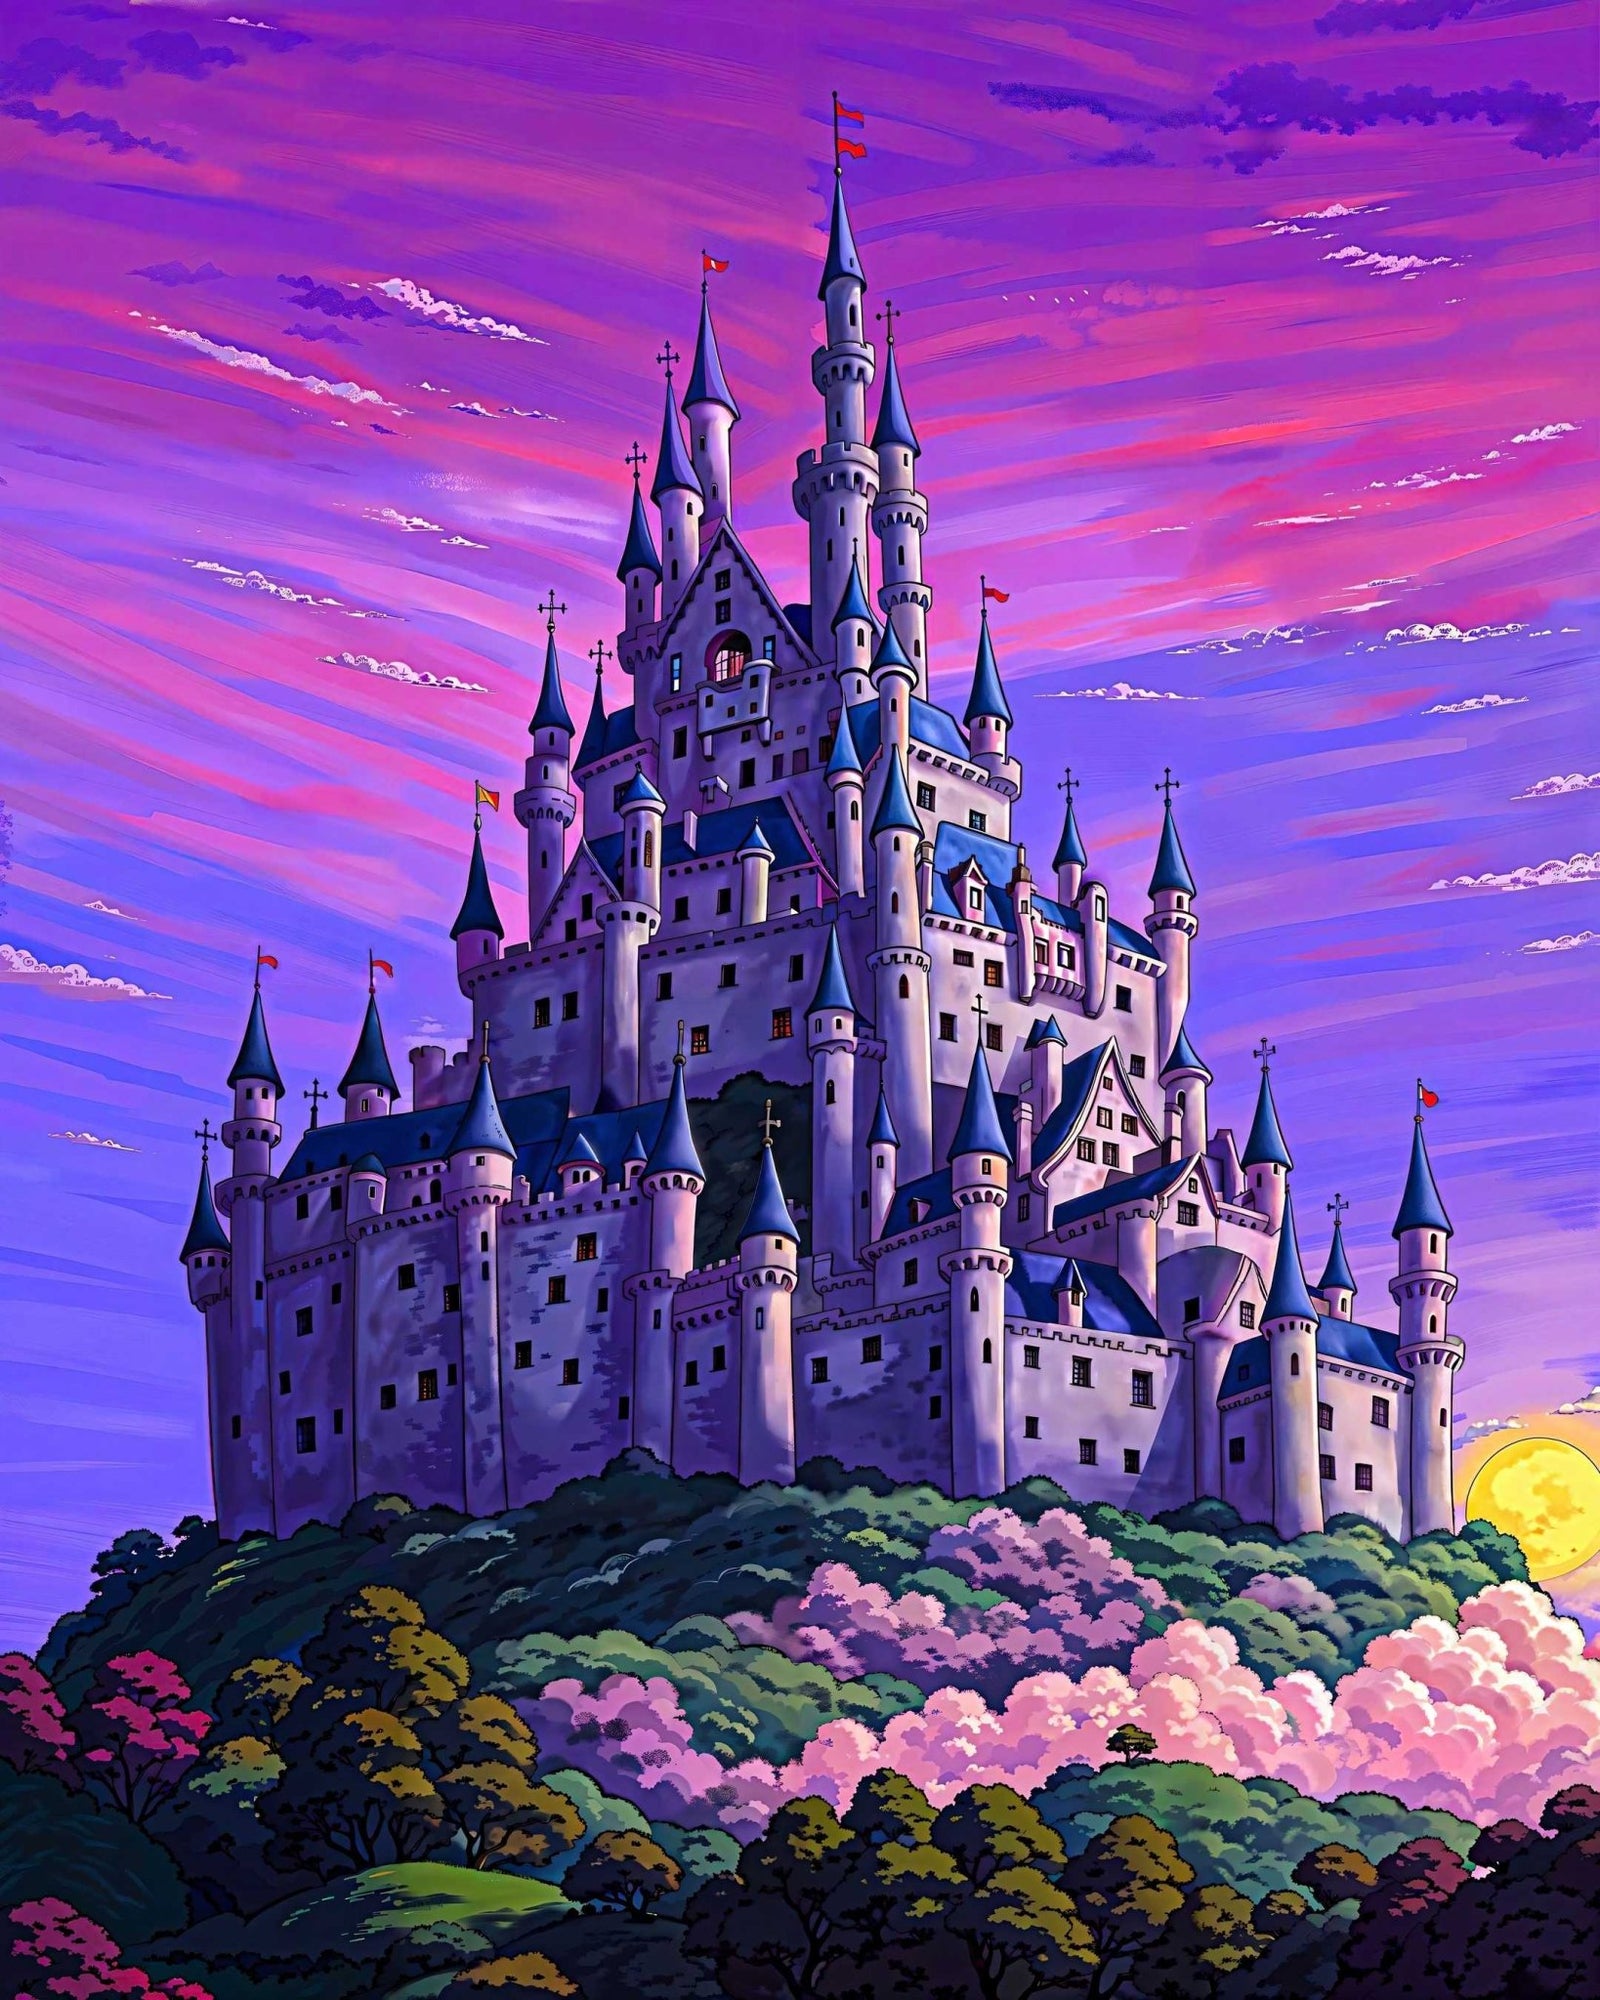 Pastel lord's palace - Poster - Ever colorful